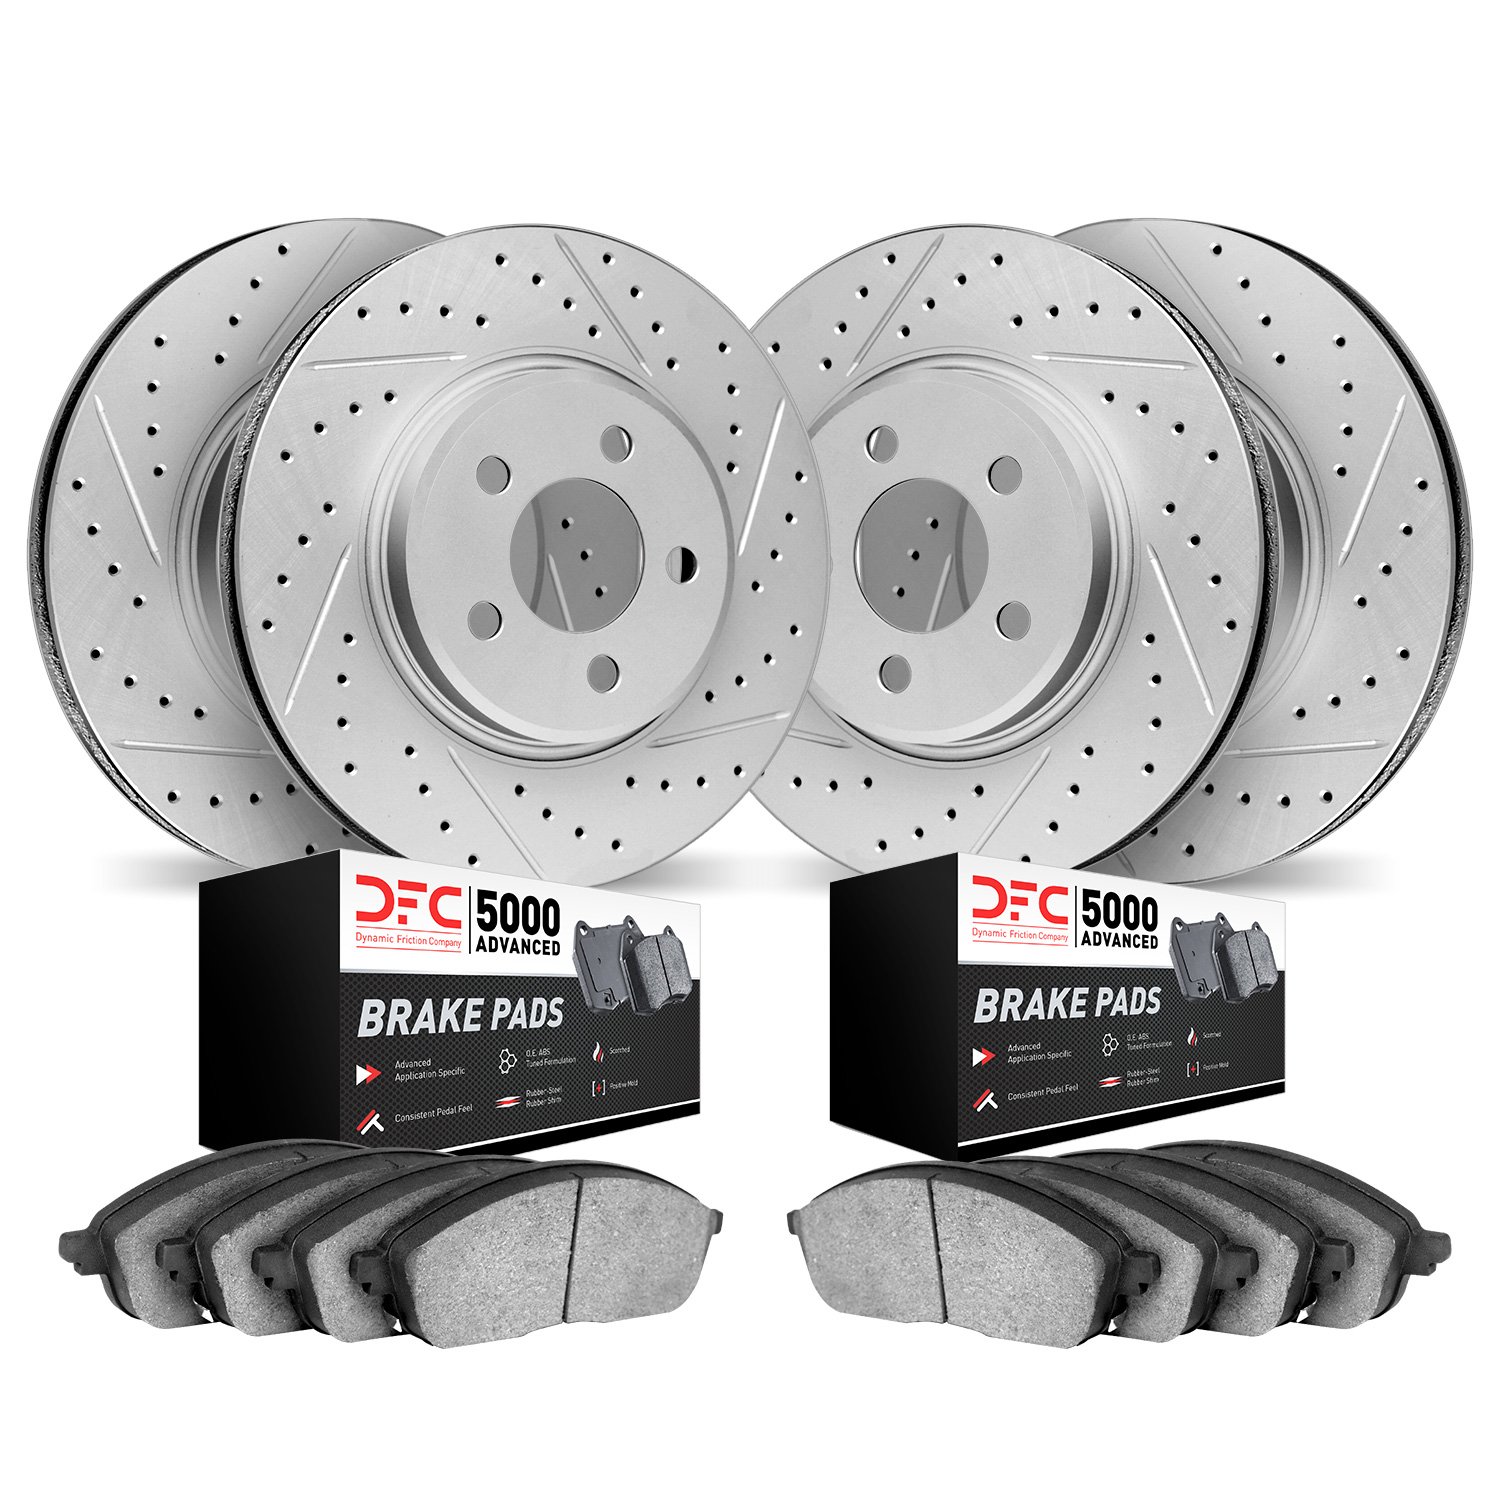 2504-40096 Geoperformance Drilled/Slotted Rotors w/5000 Advanced Brake Pads Kit, 2008-2012 Mopar, Position: Front and Rear